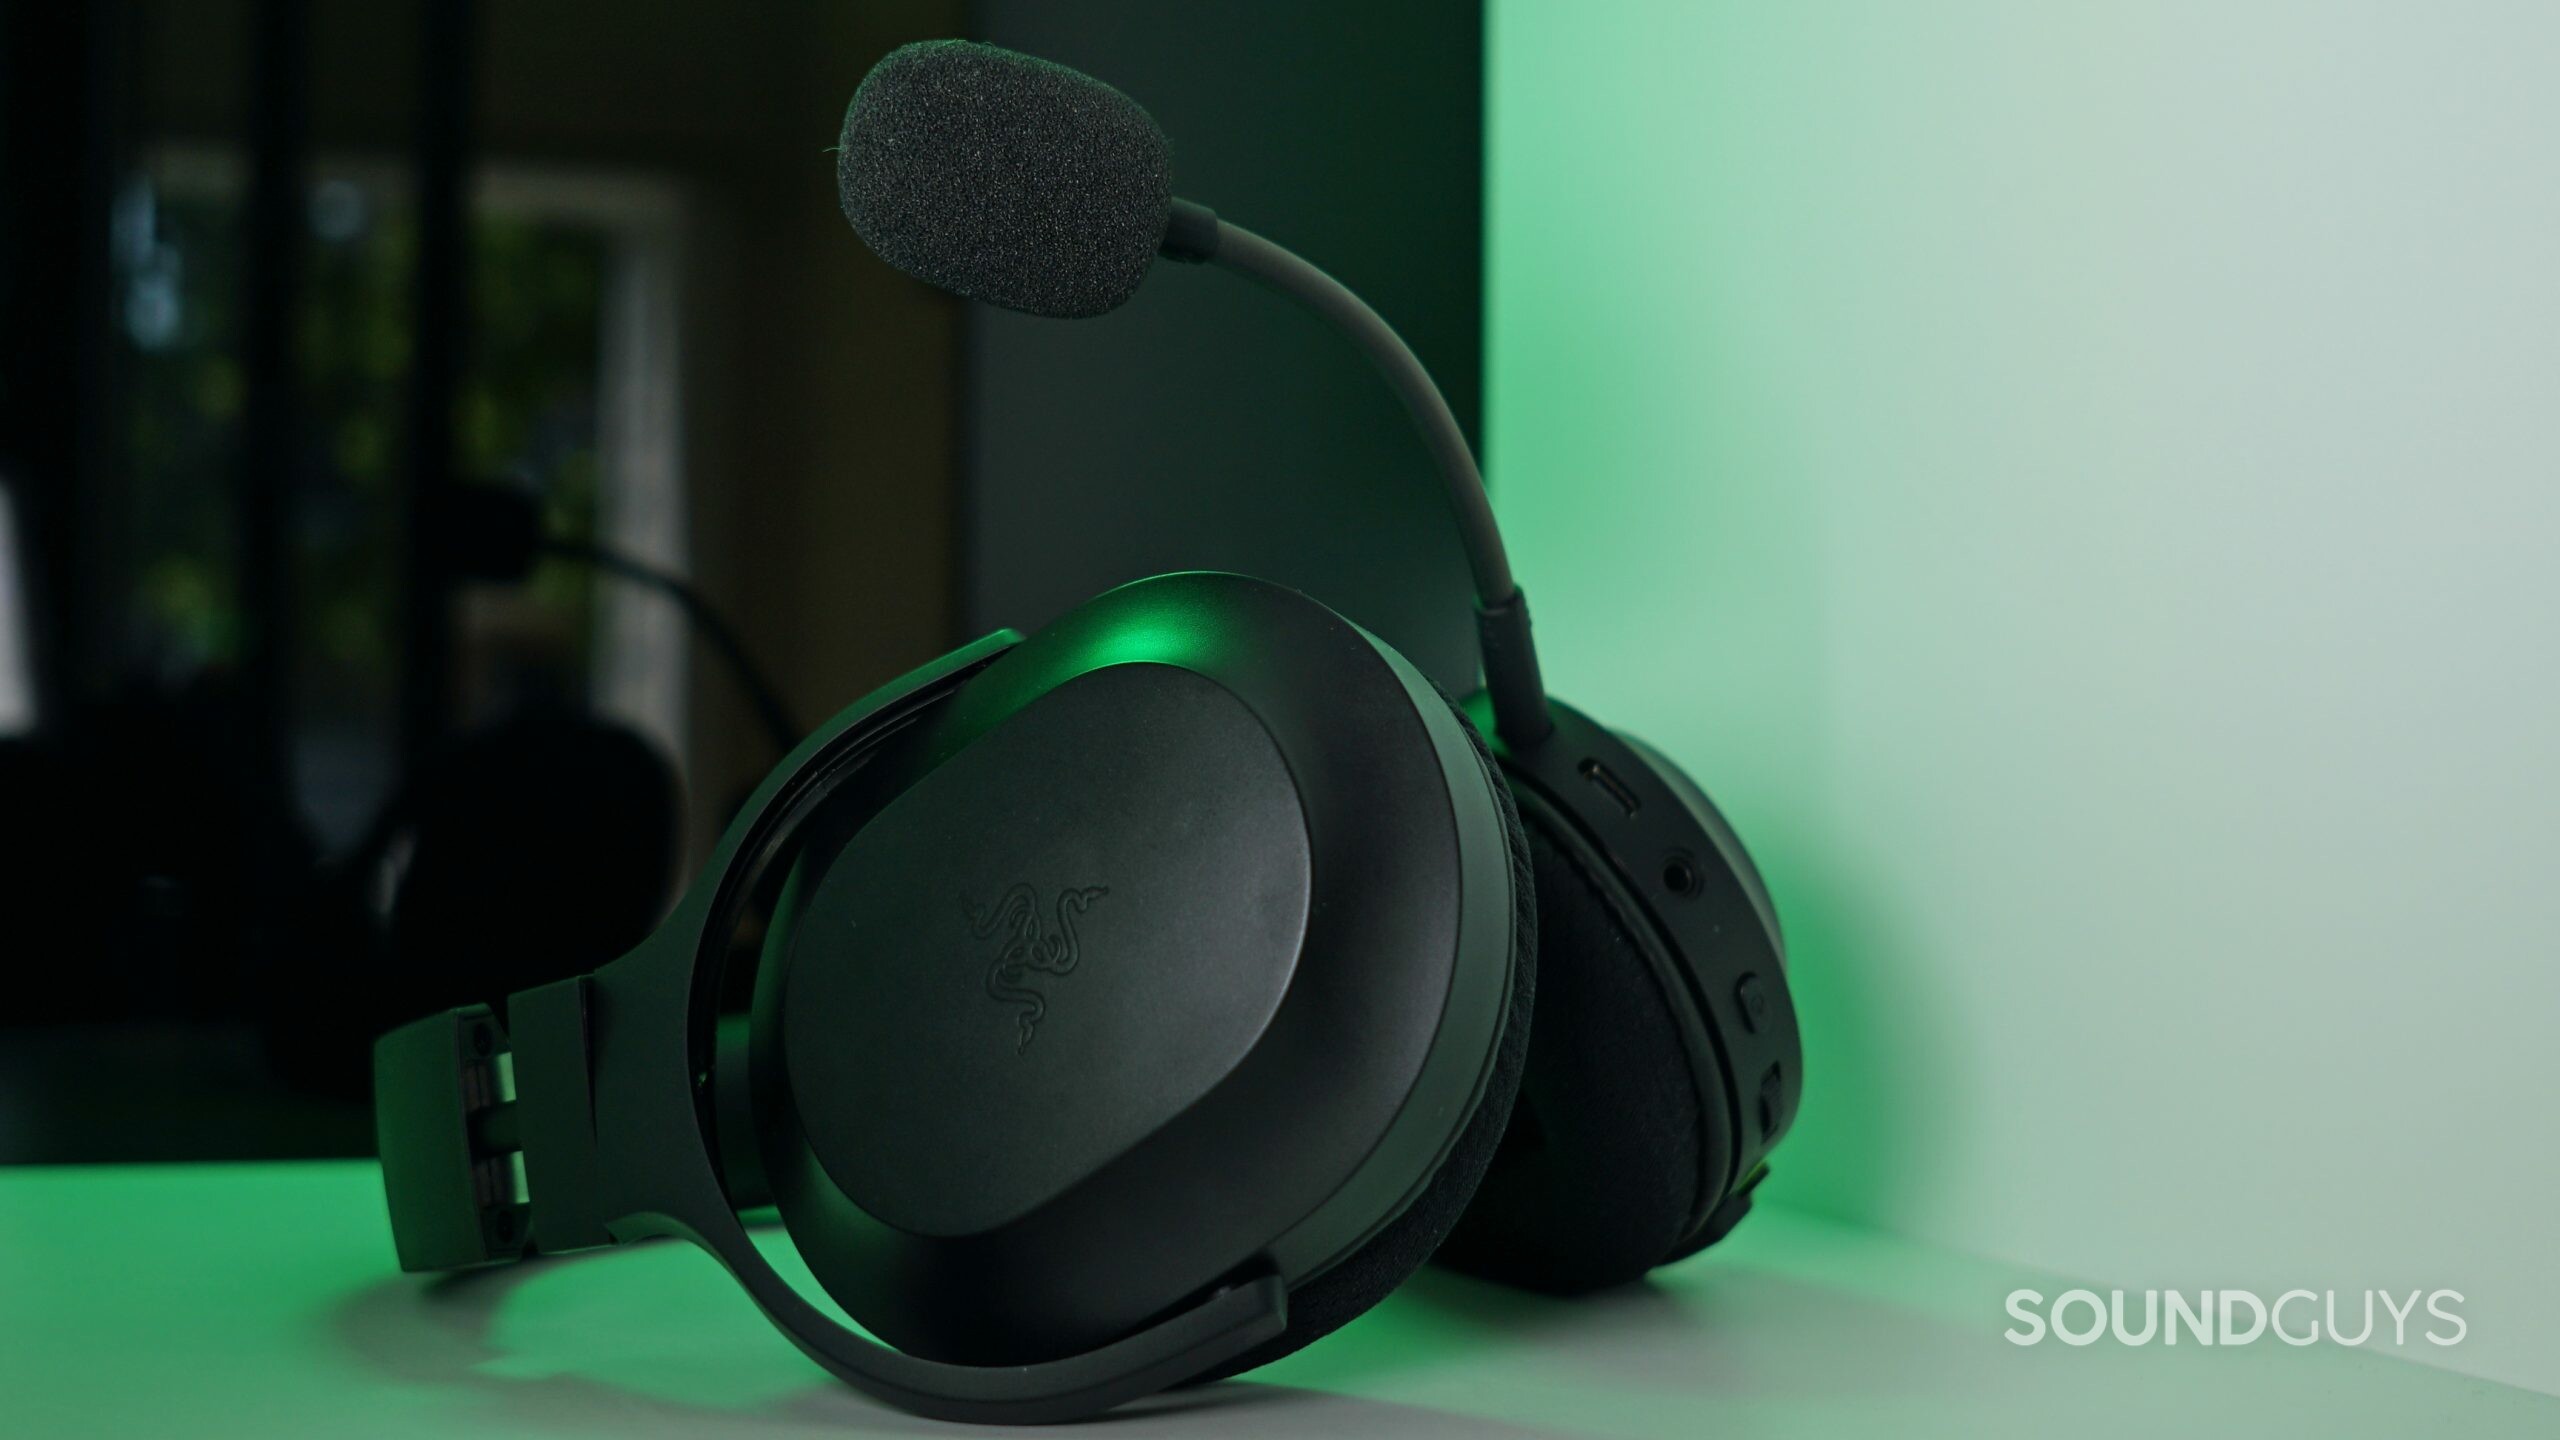 The Razer Barracuda X lays on a white shelf in front of a black reflective surface with a green light shining down.